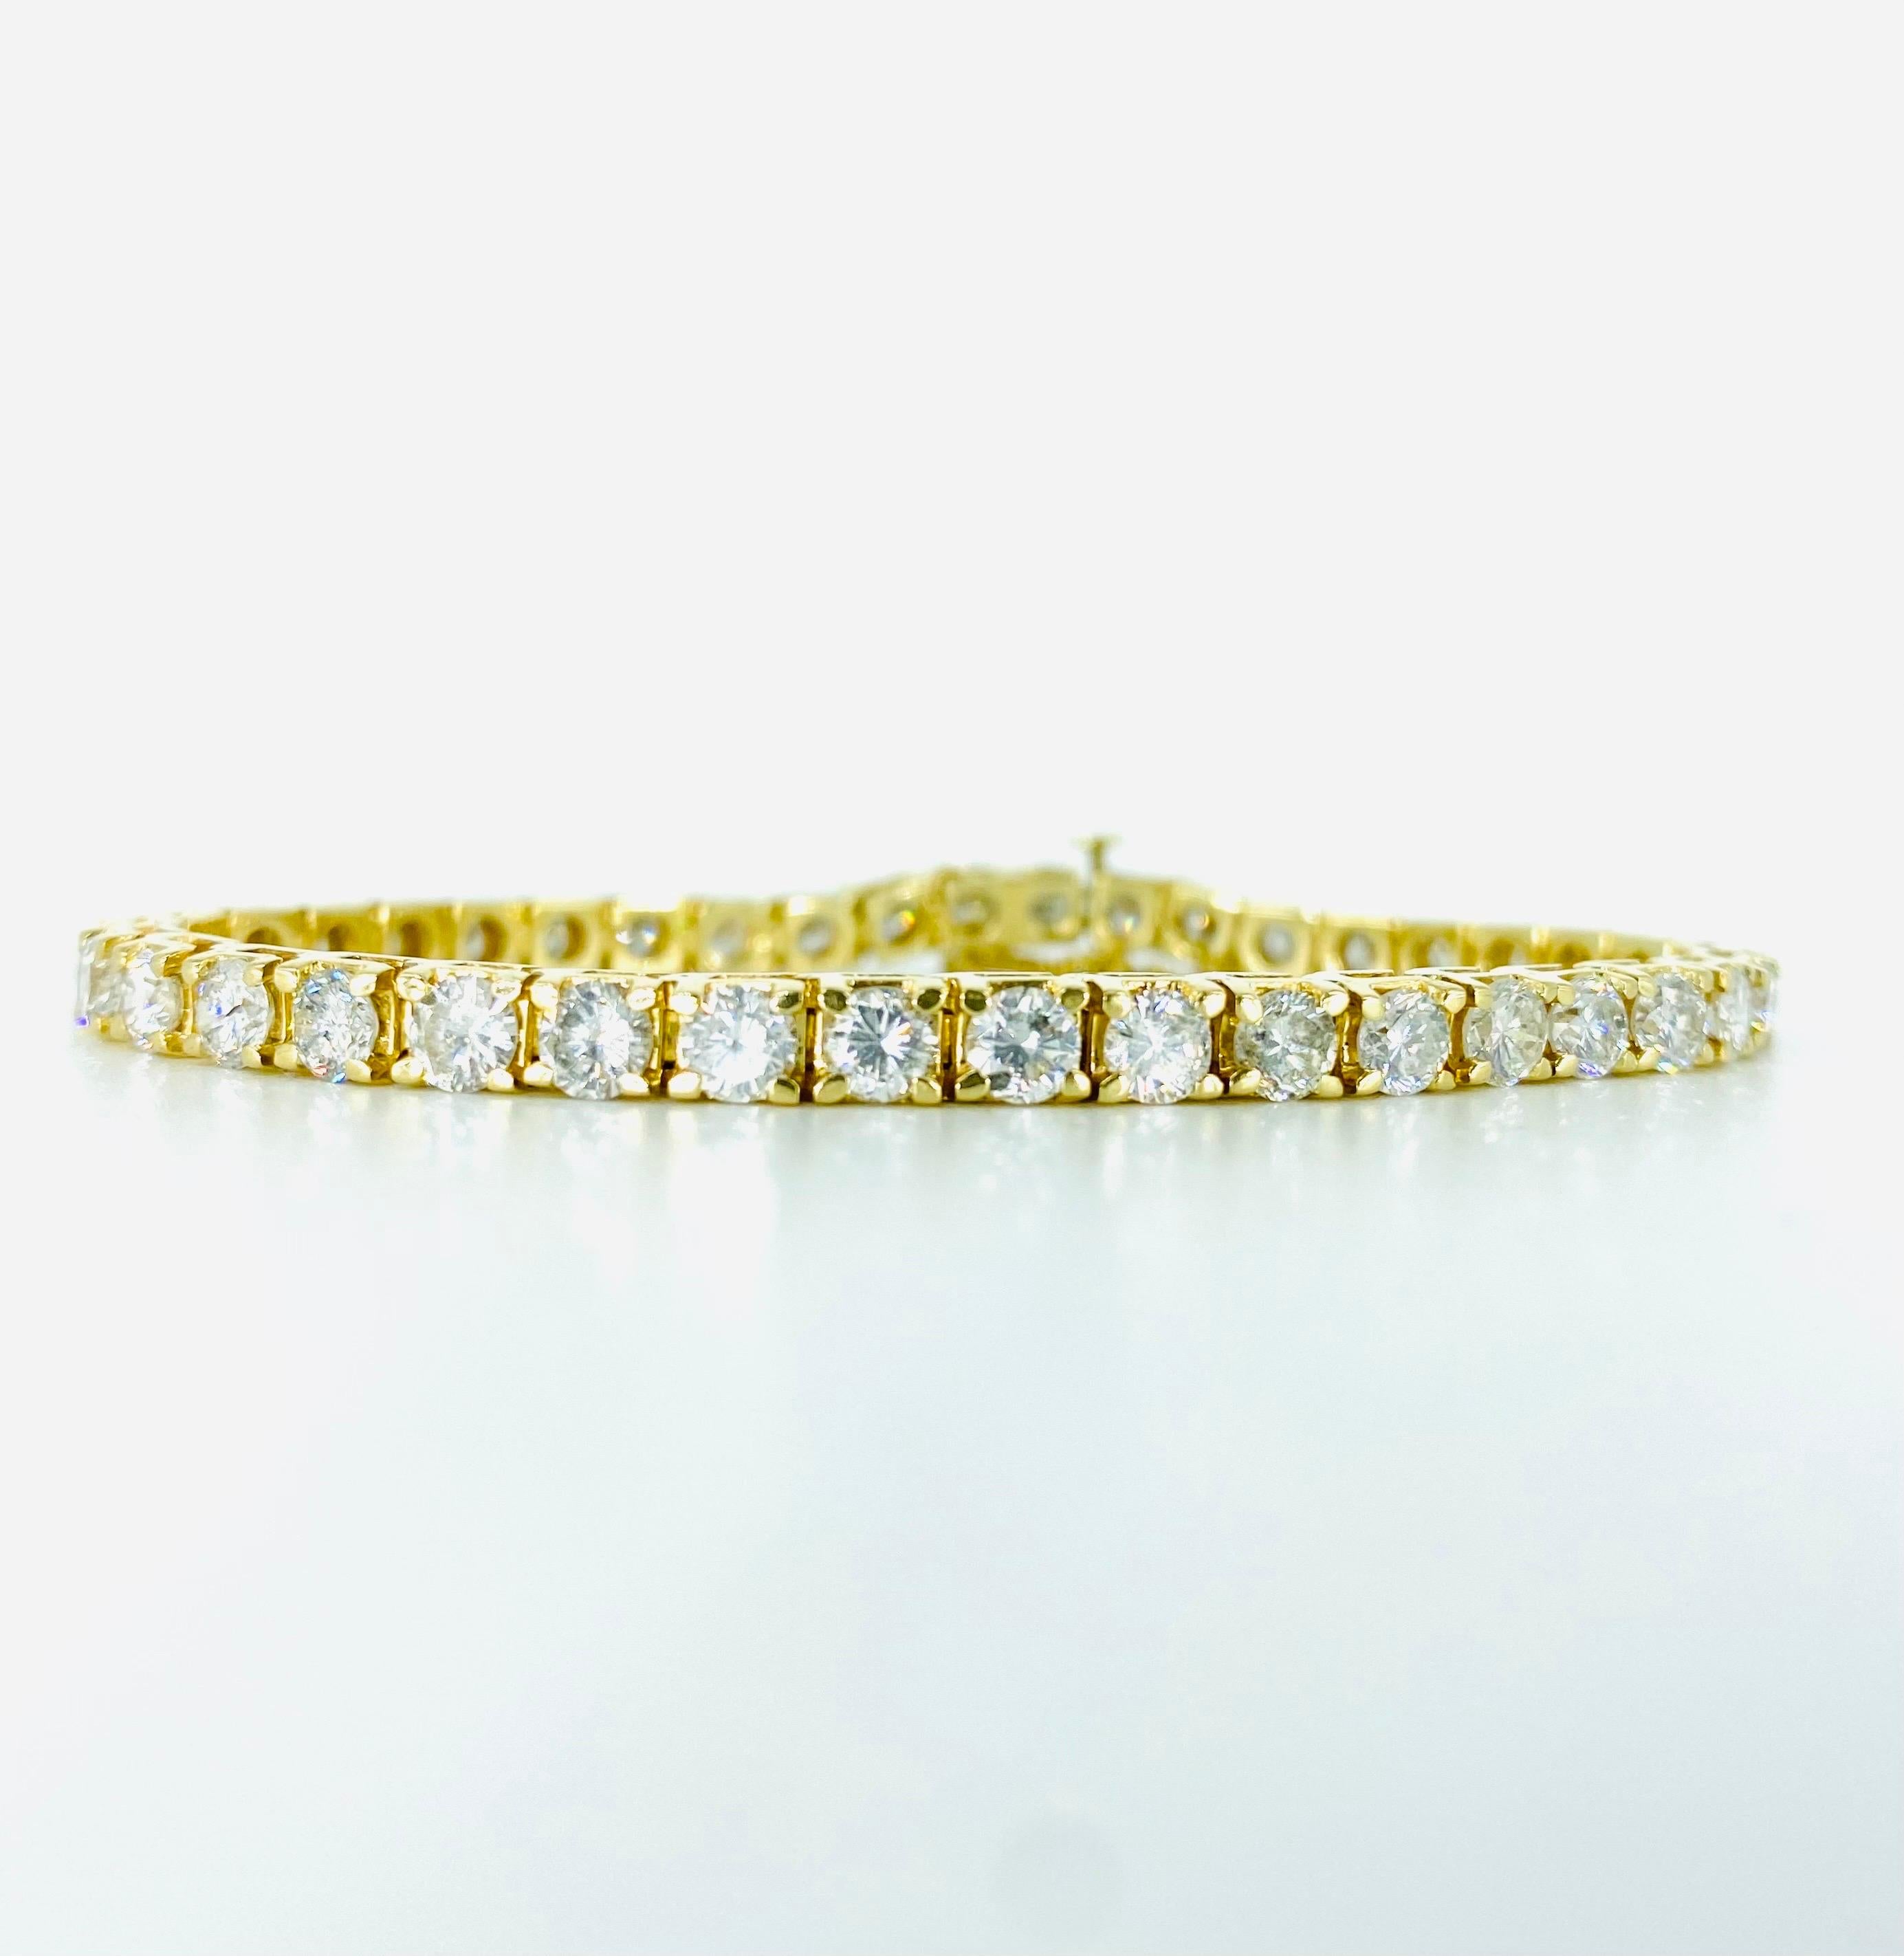 Vintage 11 Carat Diamonds Tennis Bracelet 14k Gold.
Beautiful diamond tennis Bracelet featuring 39 round brilliant cut diamonds weighing at approximately 0.28 carats each. The bracelet weighs 16.7 grams solid gold 14 karat and is 7 inches in length.